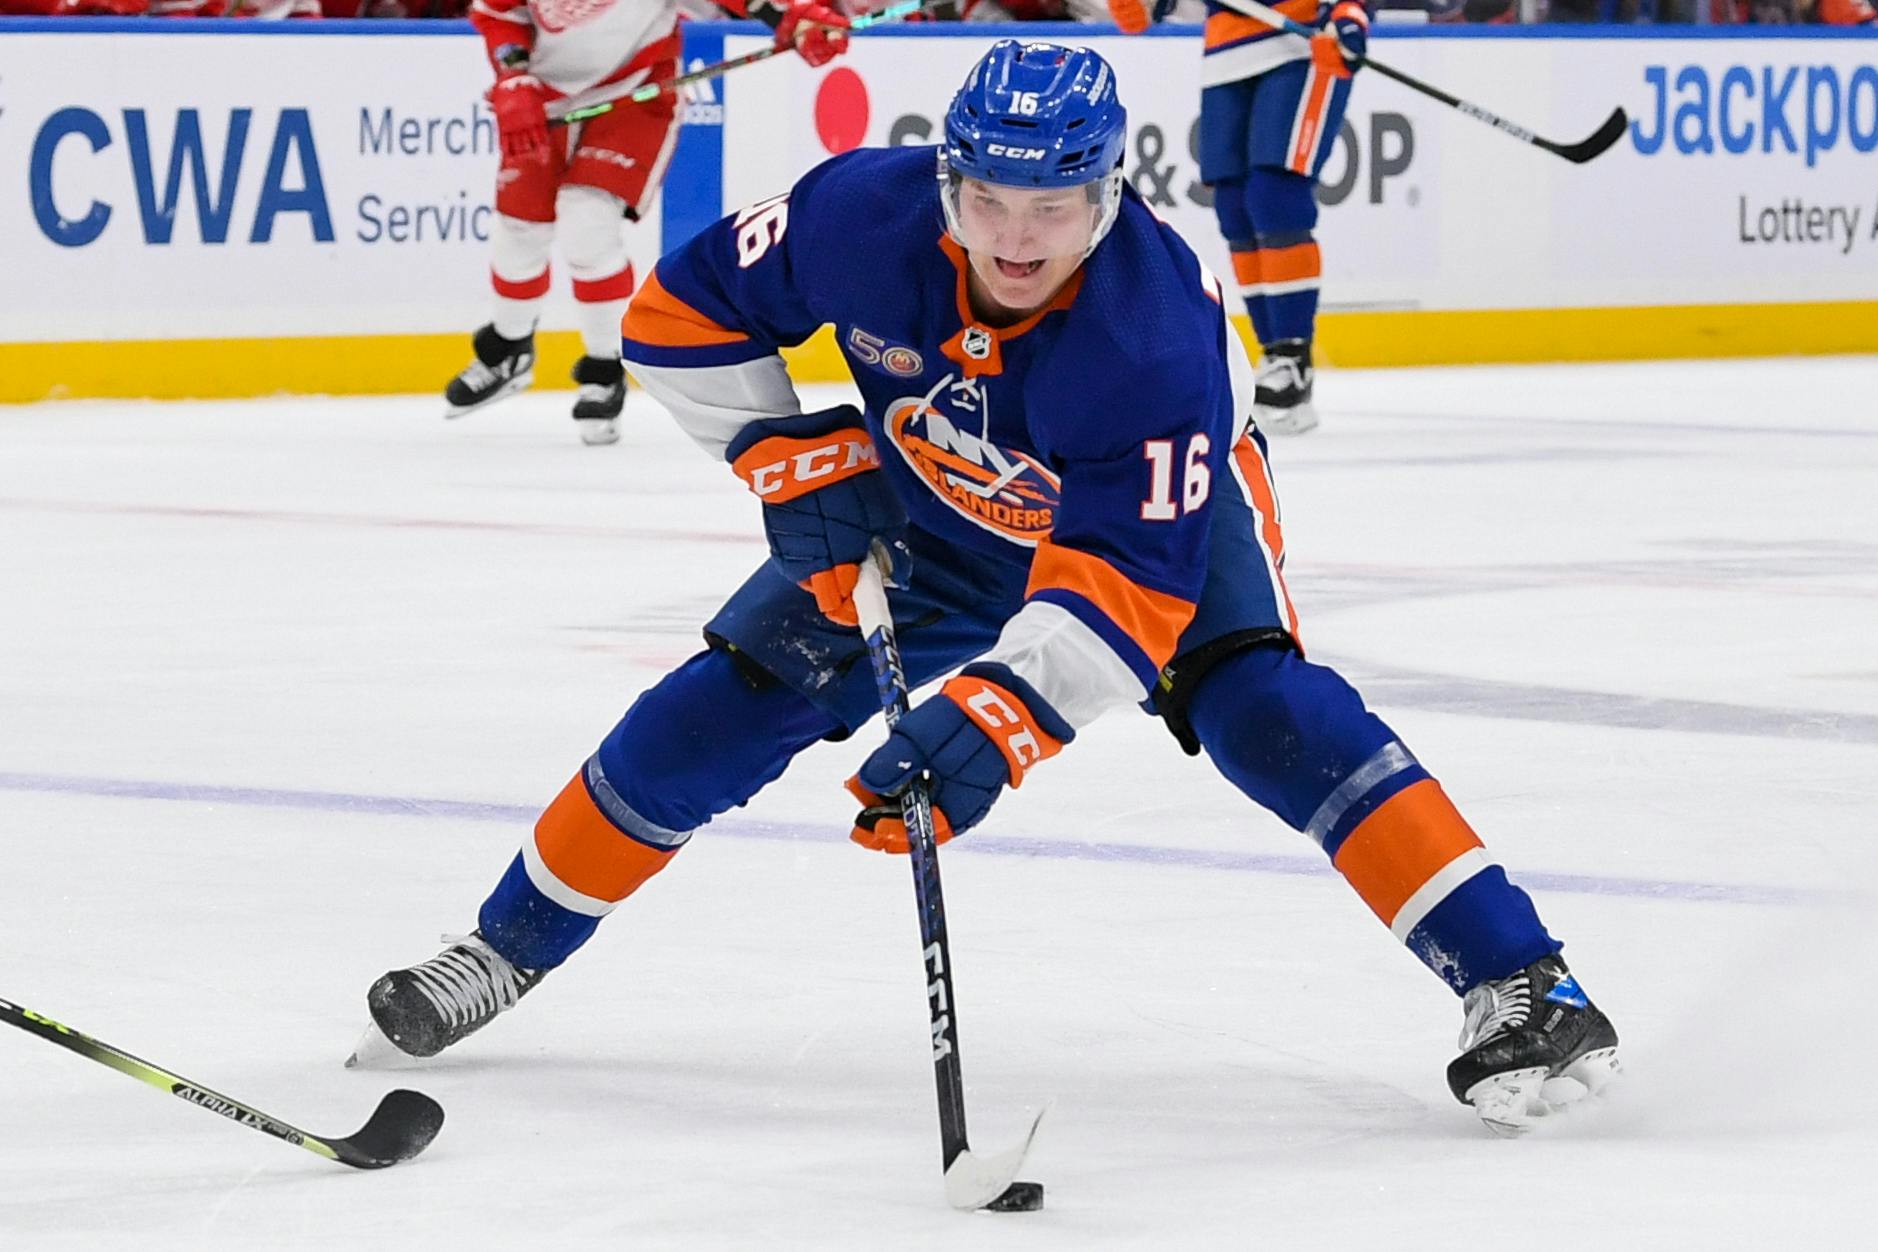 Get First Looks at Bo Horvat in his Islanders Jersey